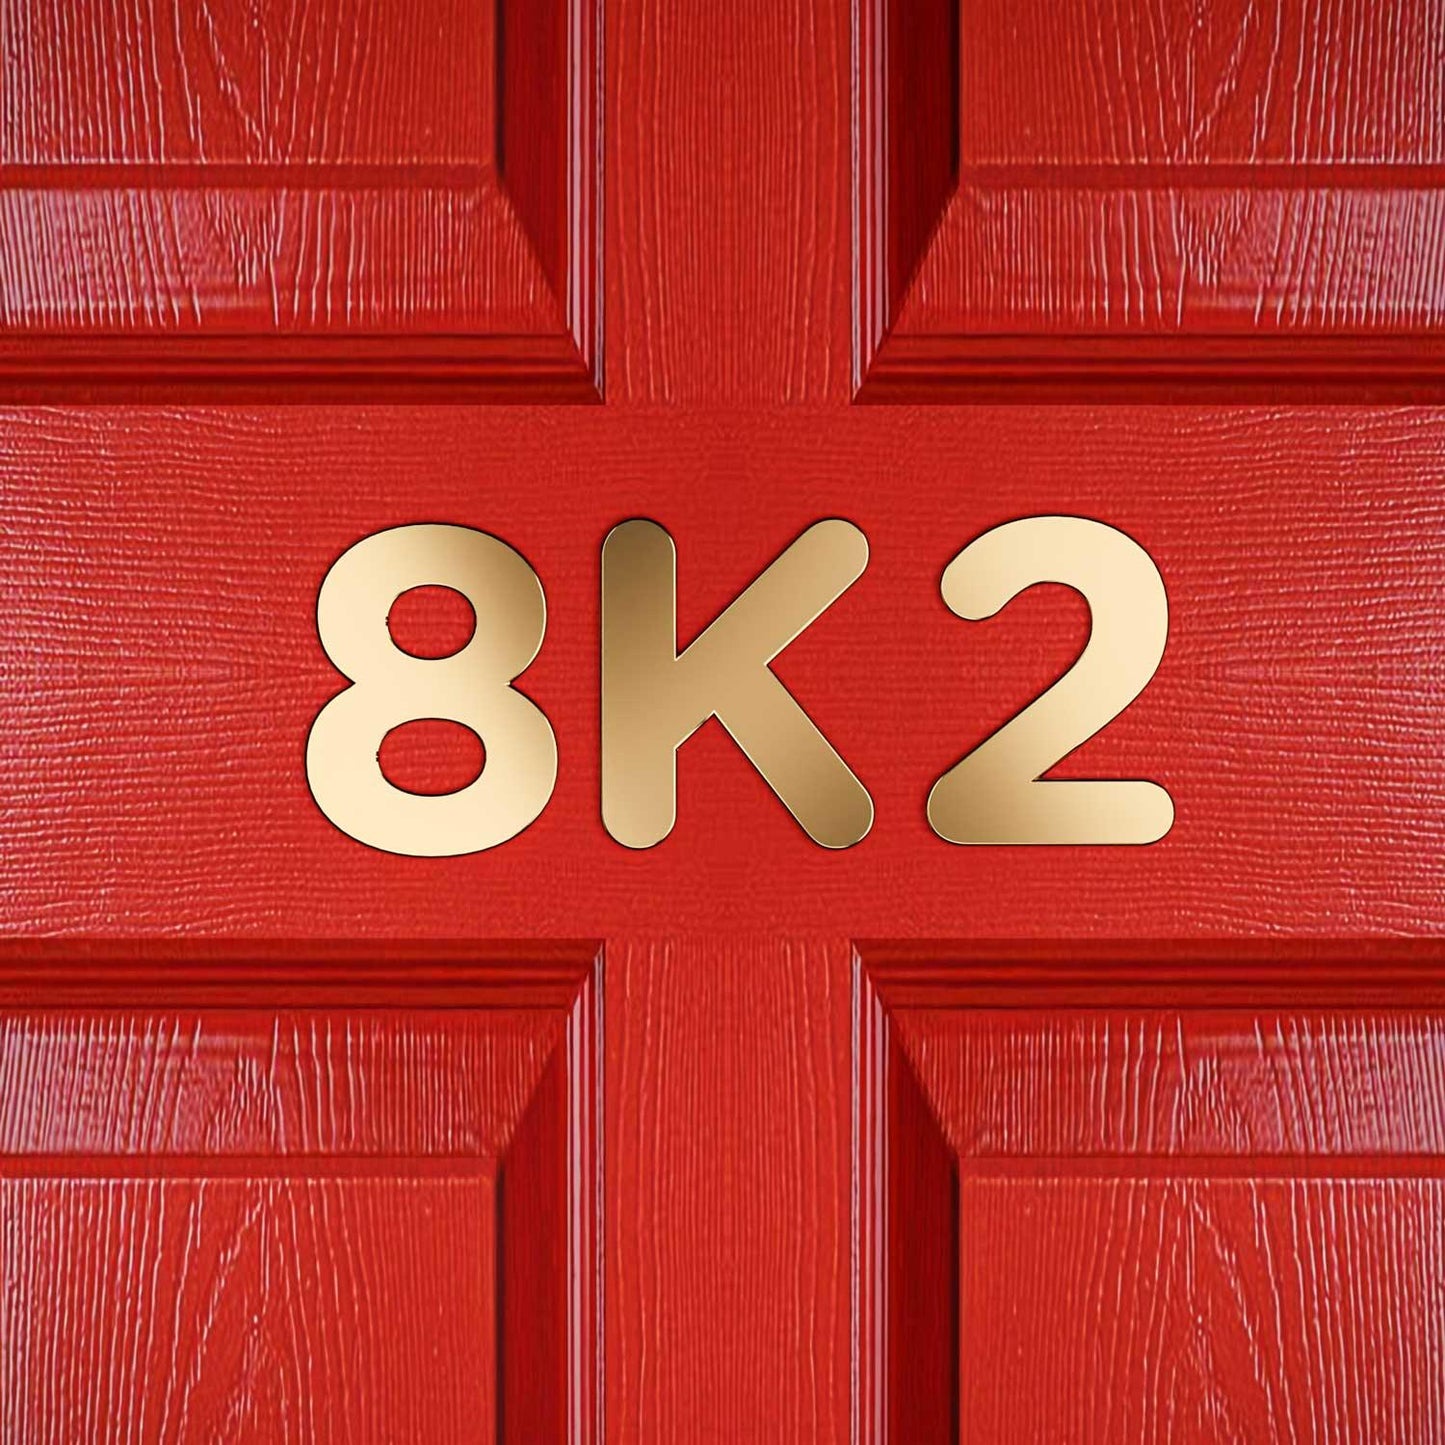 Gotham - Rounded Brass Door Numbers & Letters - Housenama